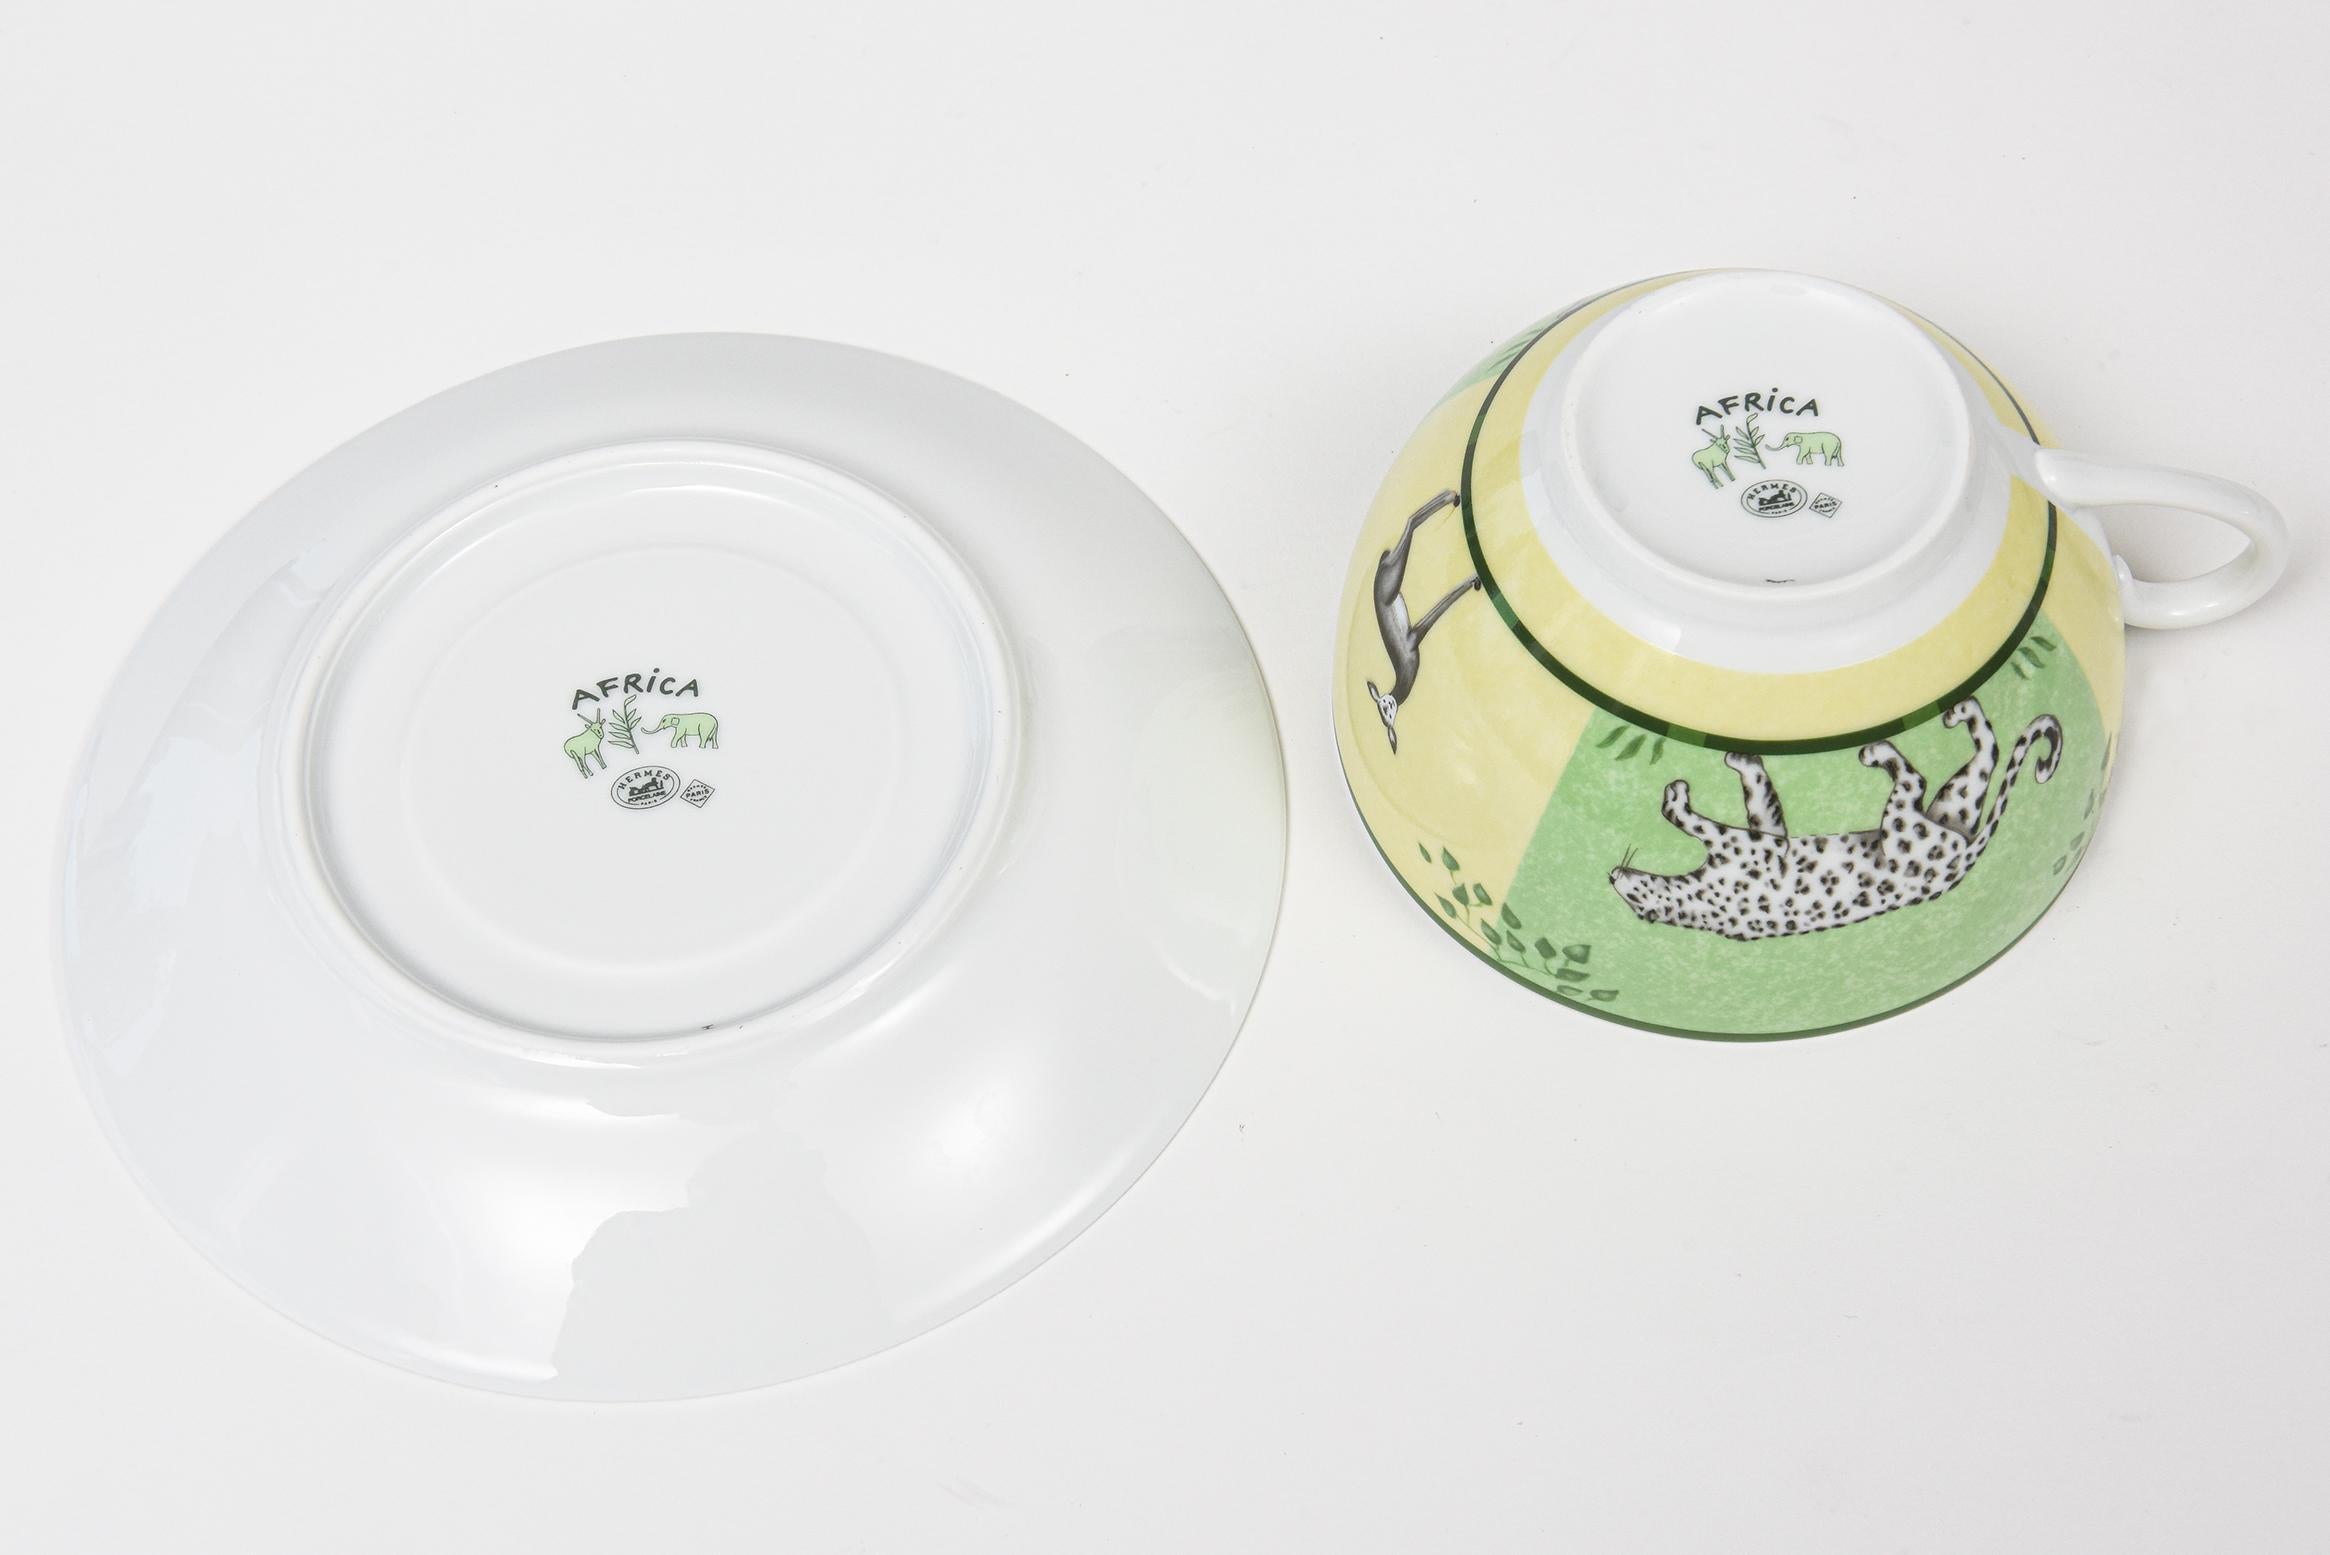 Hermes Africa Green Morning Breakfast Set, Pair of Cup with Saucer and Plate 6